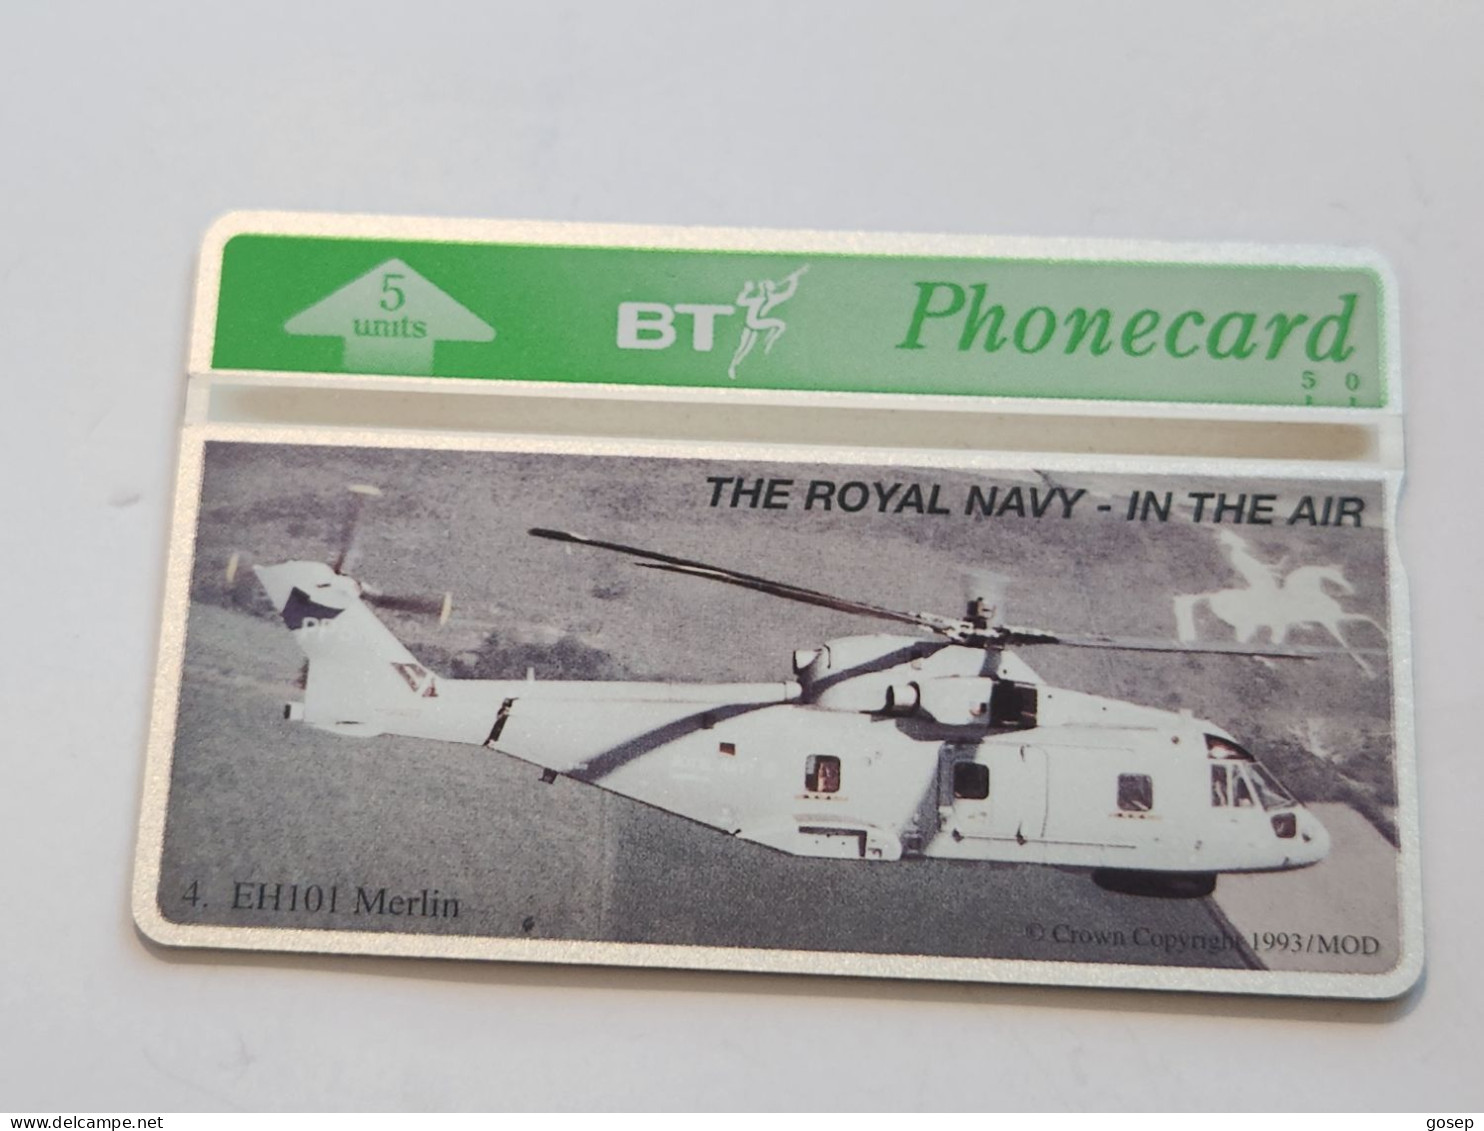 United Kingdom-(BTG-373)-Royal Navy In Air-(4)-(327)(5units)(428L01970)(tirage-600)-price Cataloge--8.00£-mint - BT General Issues